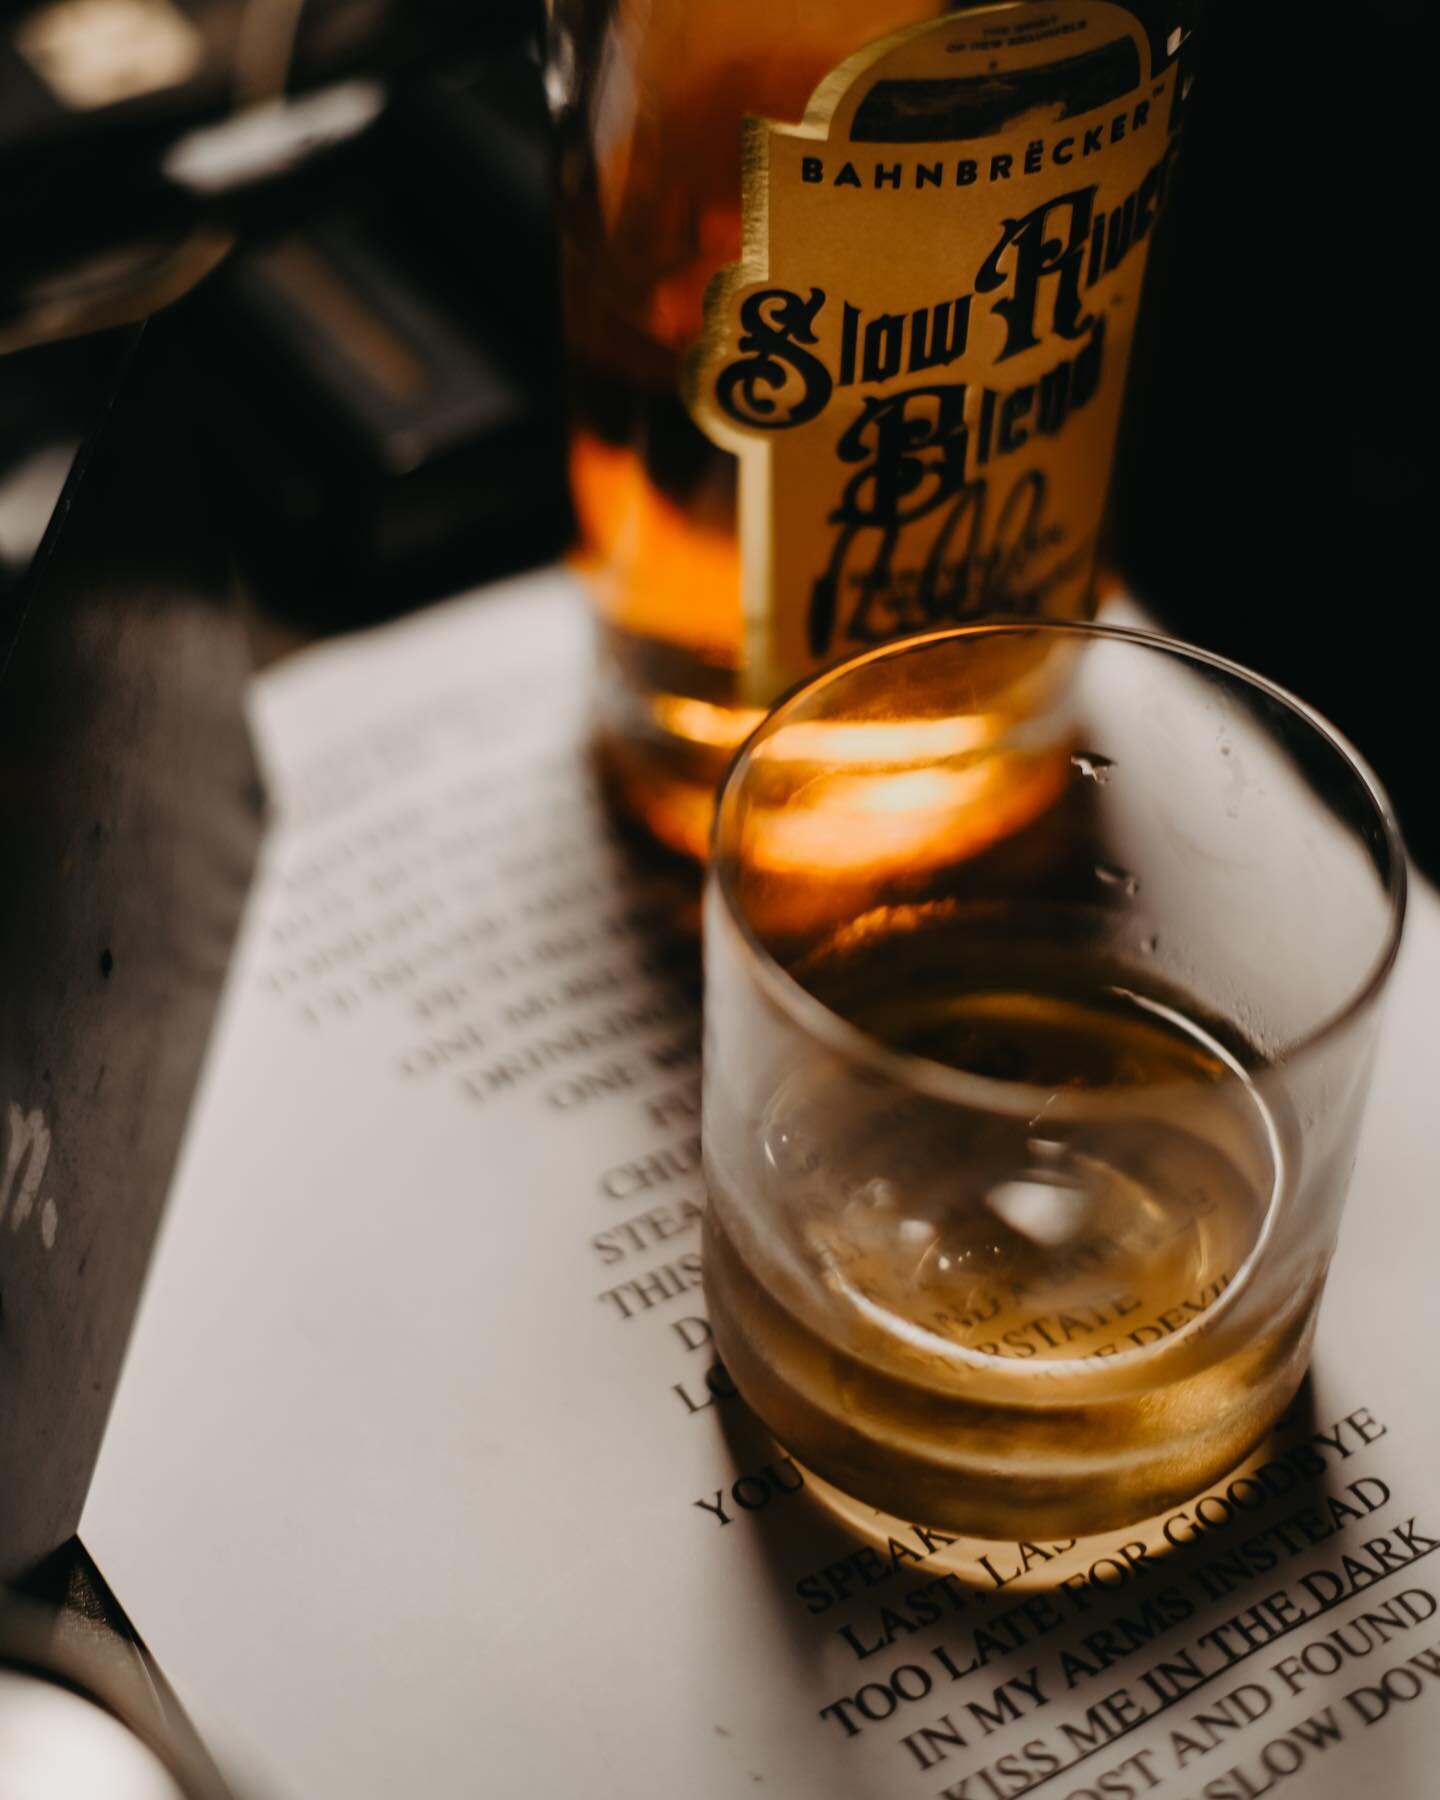 &ldquo;Whiskey&rsquo;s Got a Hold of Me&rdquo; - Famous words of our founder Randy Rogers! 

What is your favorite Randy Rogers Band song? Tell us in the comments! 

#areyouabahnbrecker #bahnbrecker #slowriverblend #srb #whiskey #hefeweizen #hefeweiz